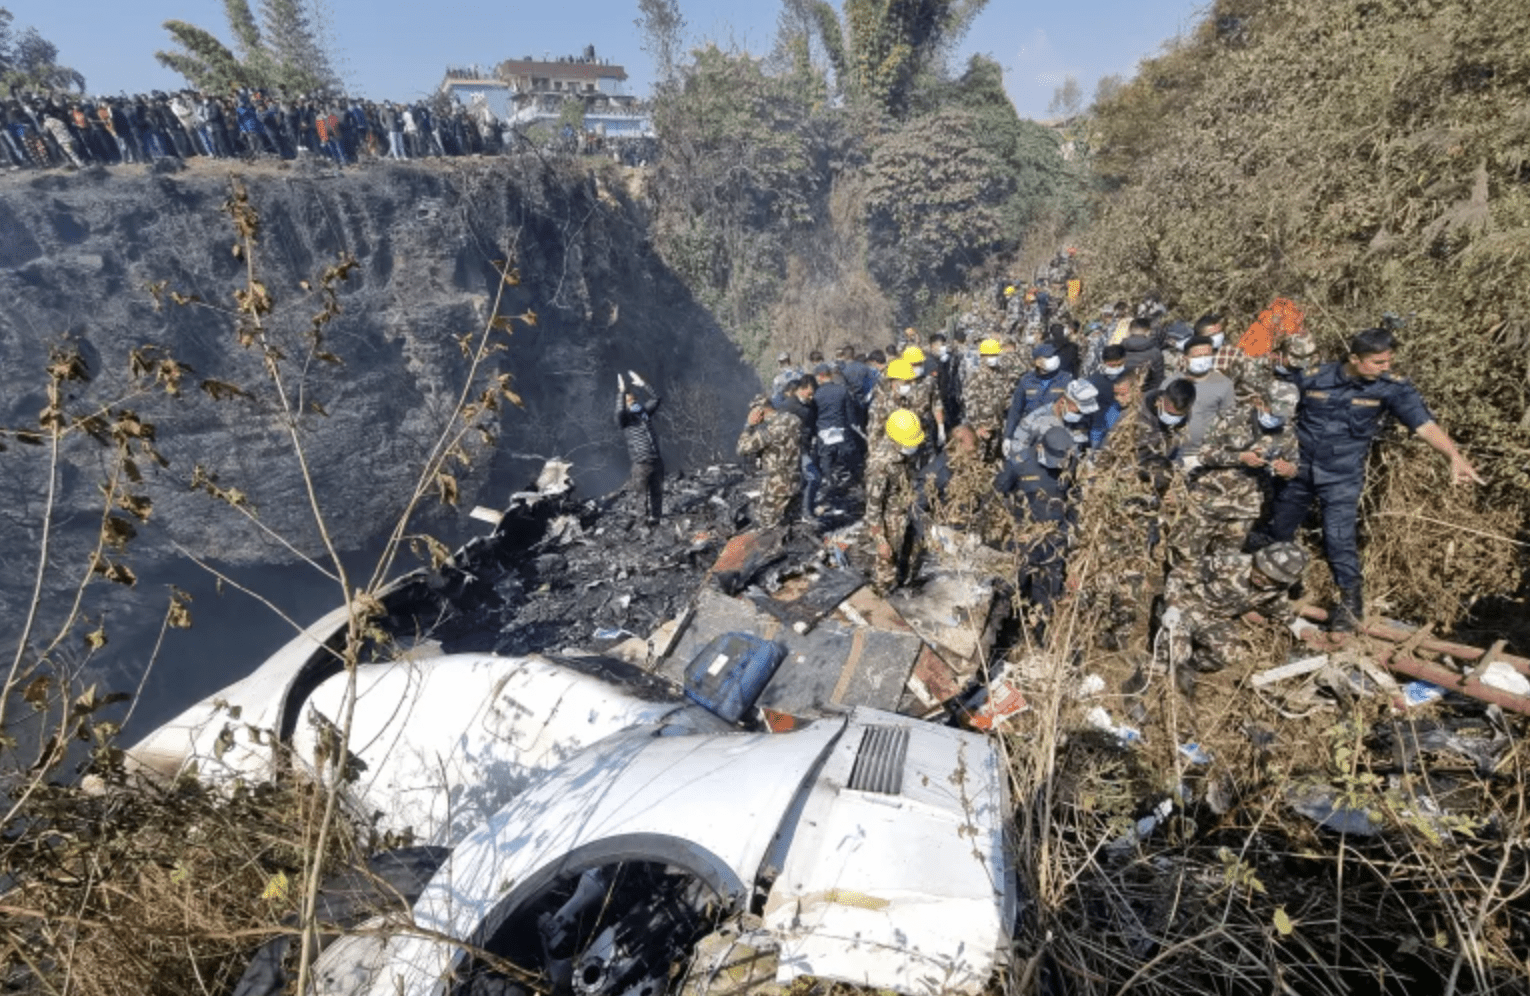 Deadly Plane Crash in Nepal Leaves 68 Dead, Worst Incident in 30 Years